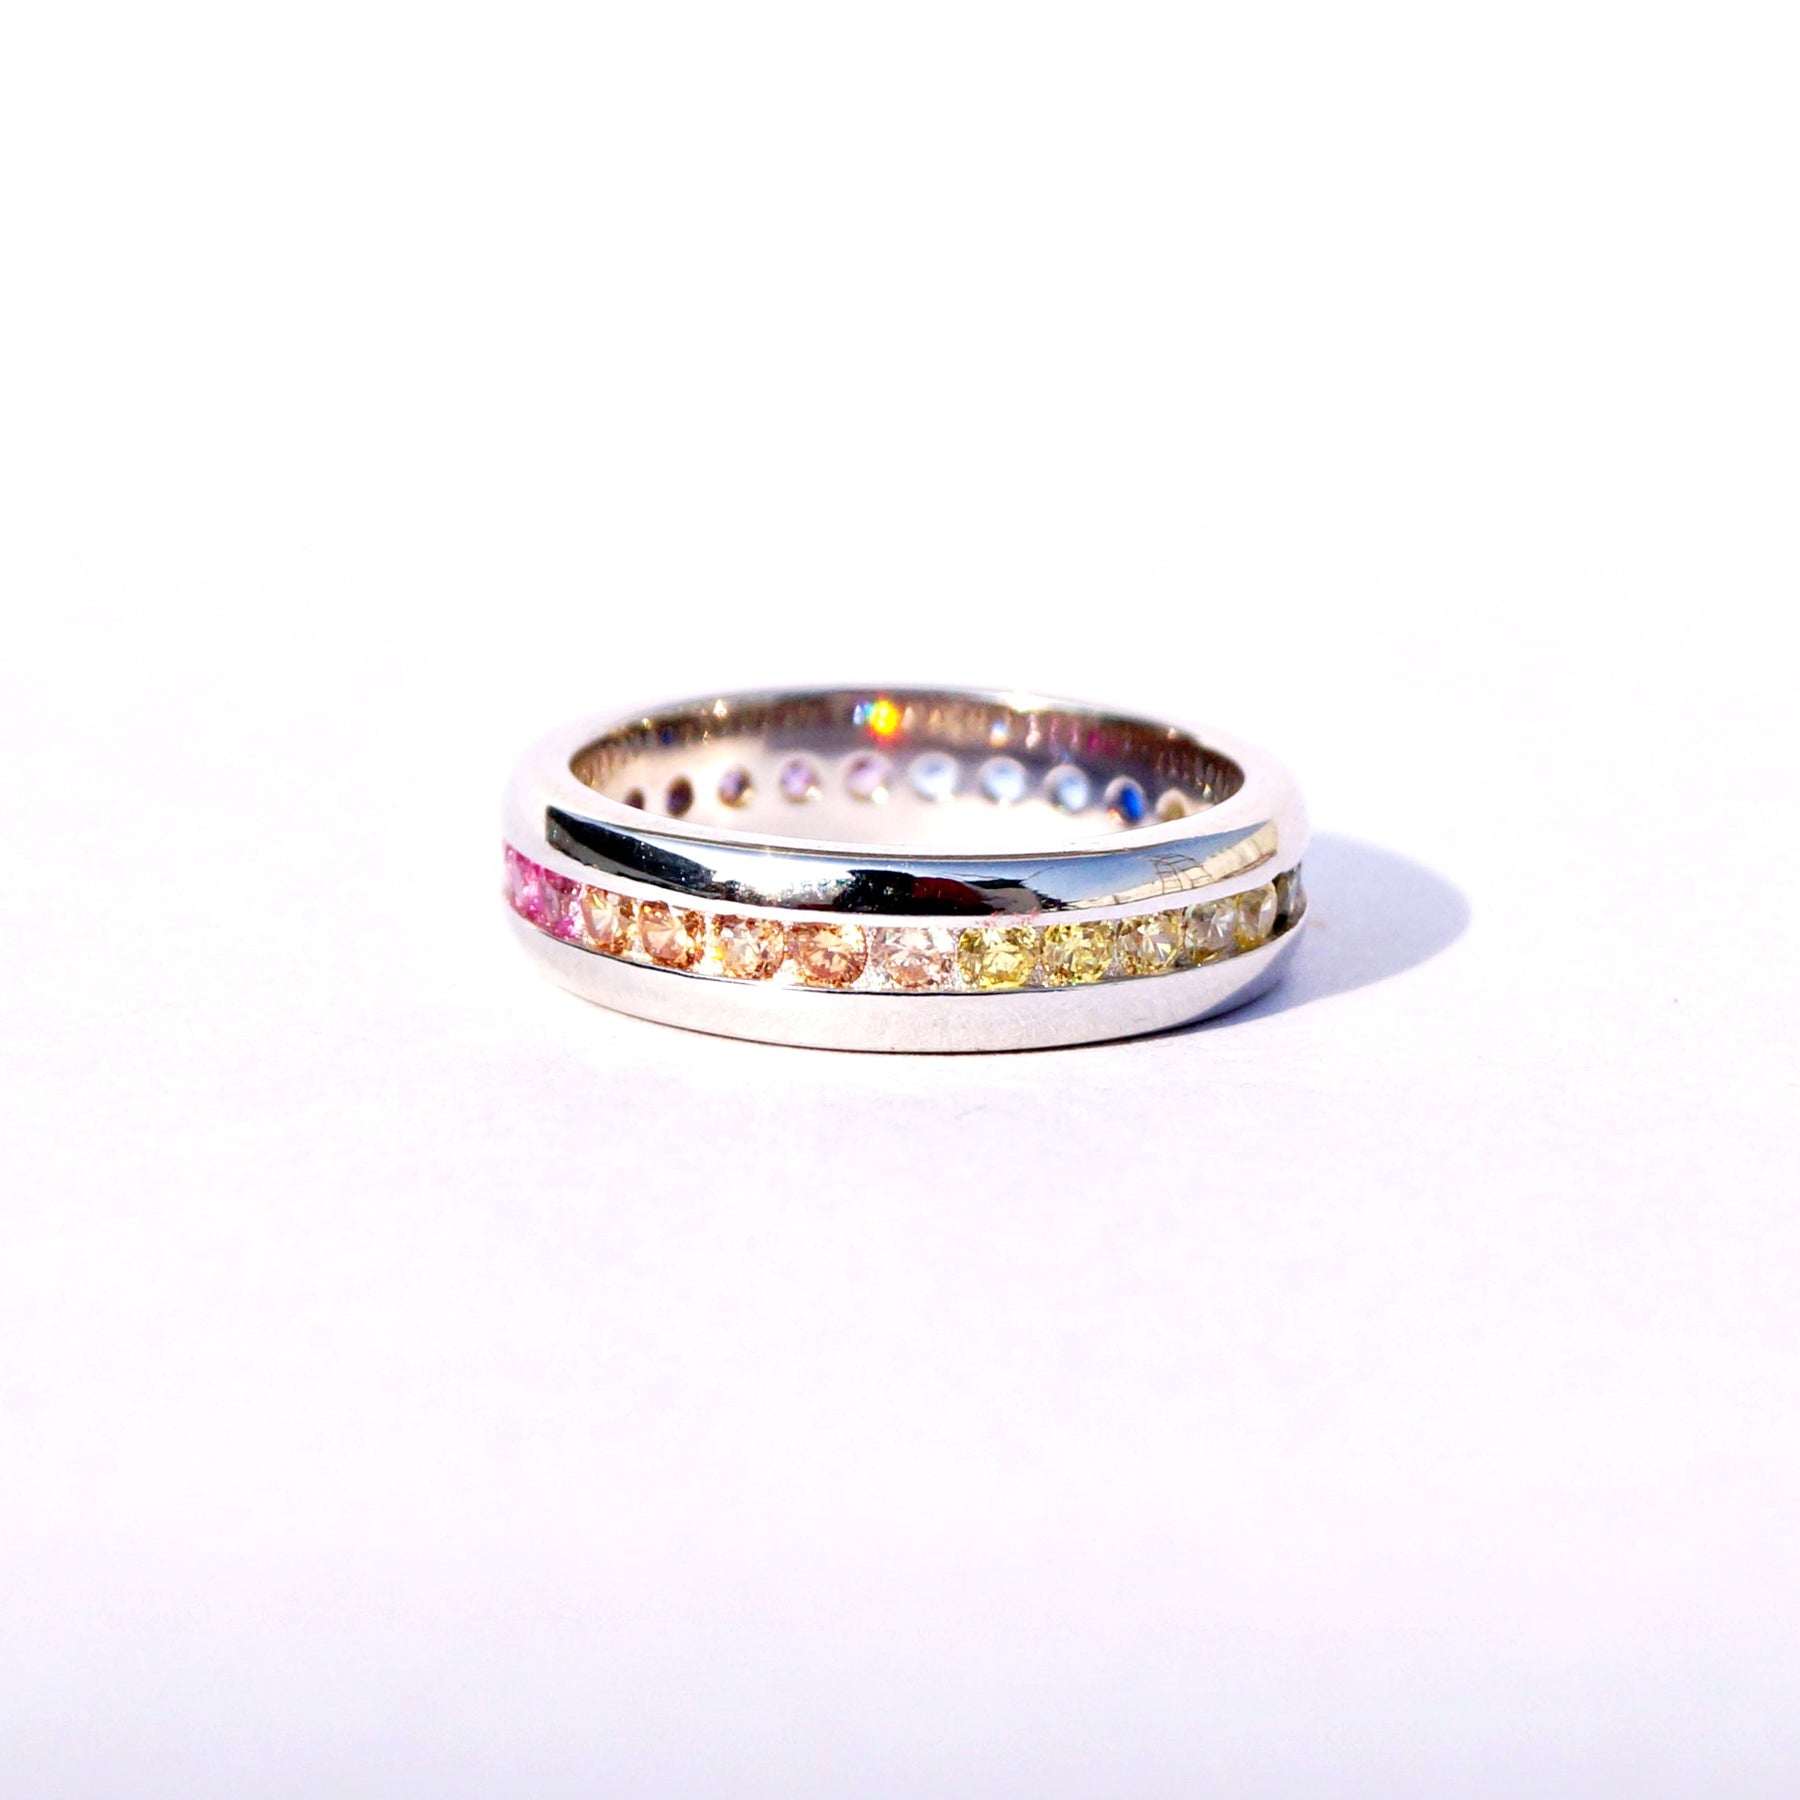 The Rainbow Band Ring